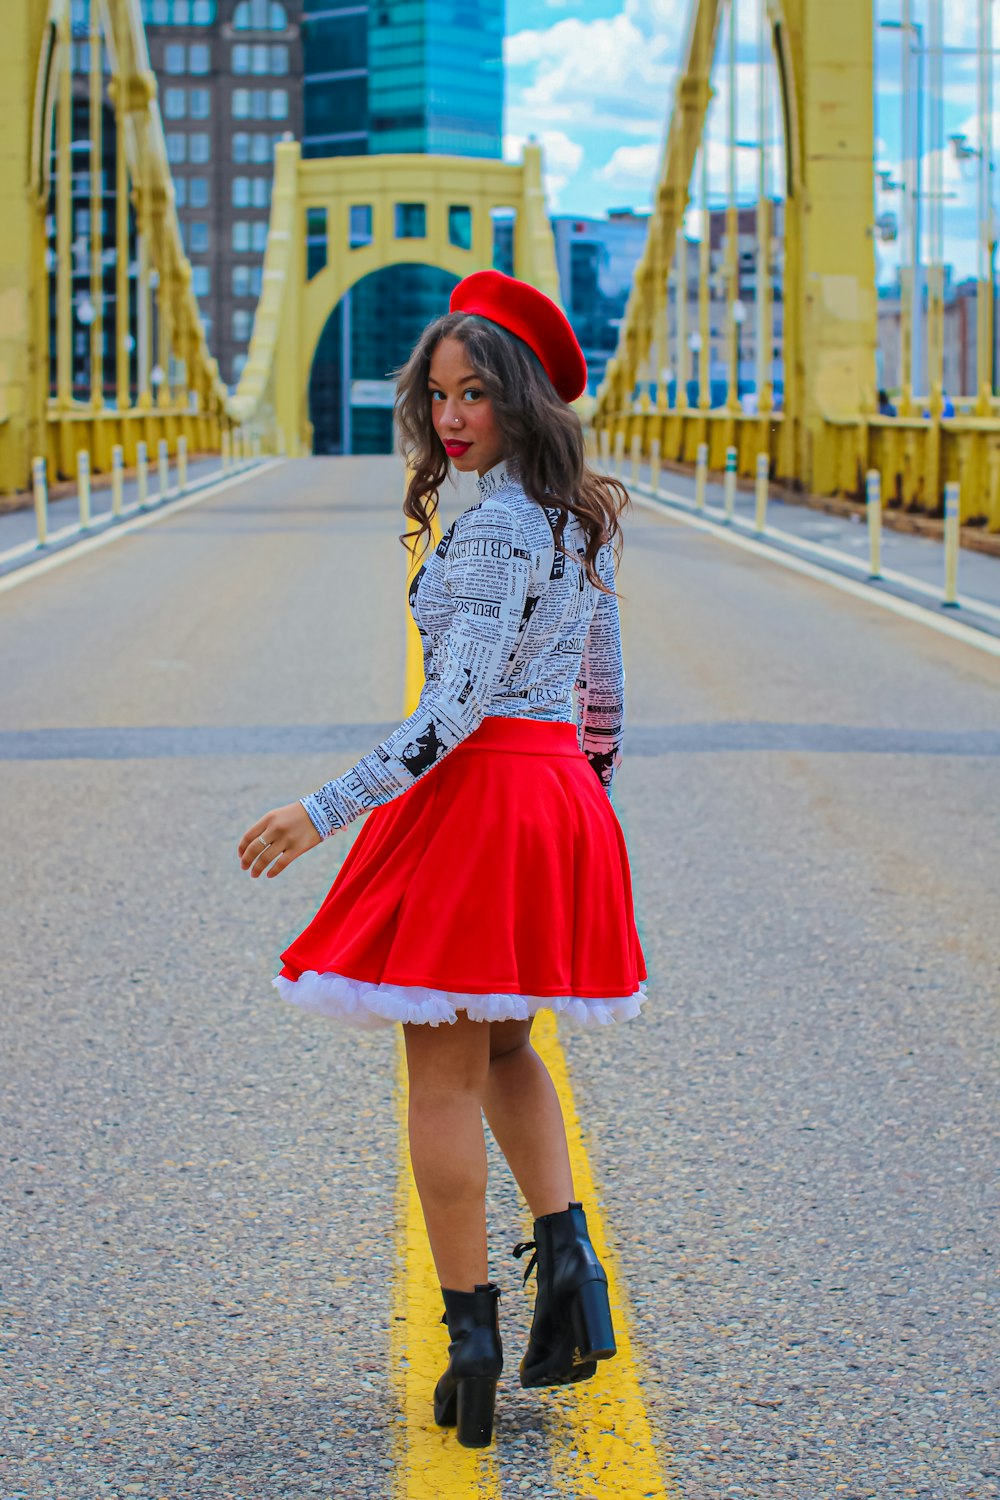 woman in black and white long sleeve shirt and red skirt standing on gray asphalt road